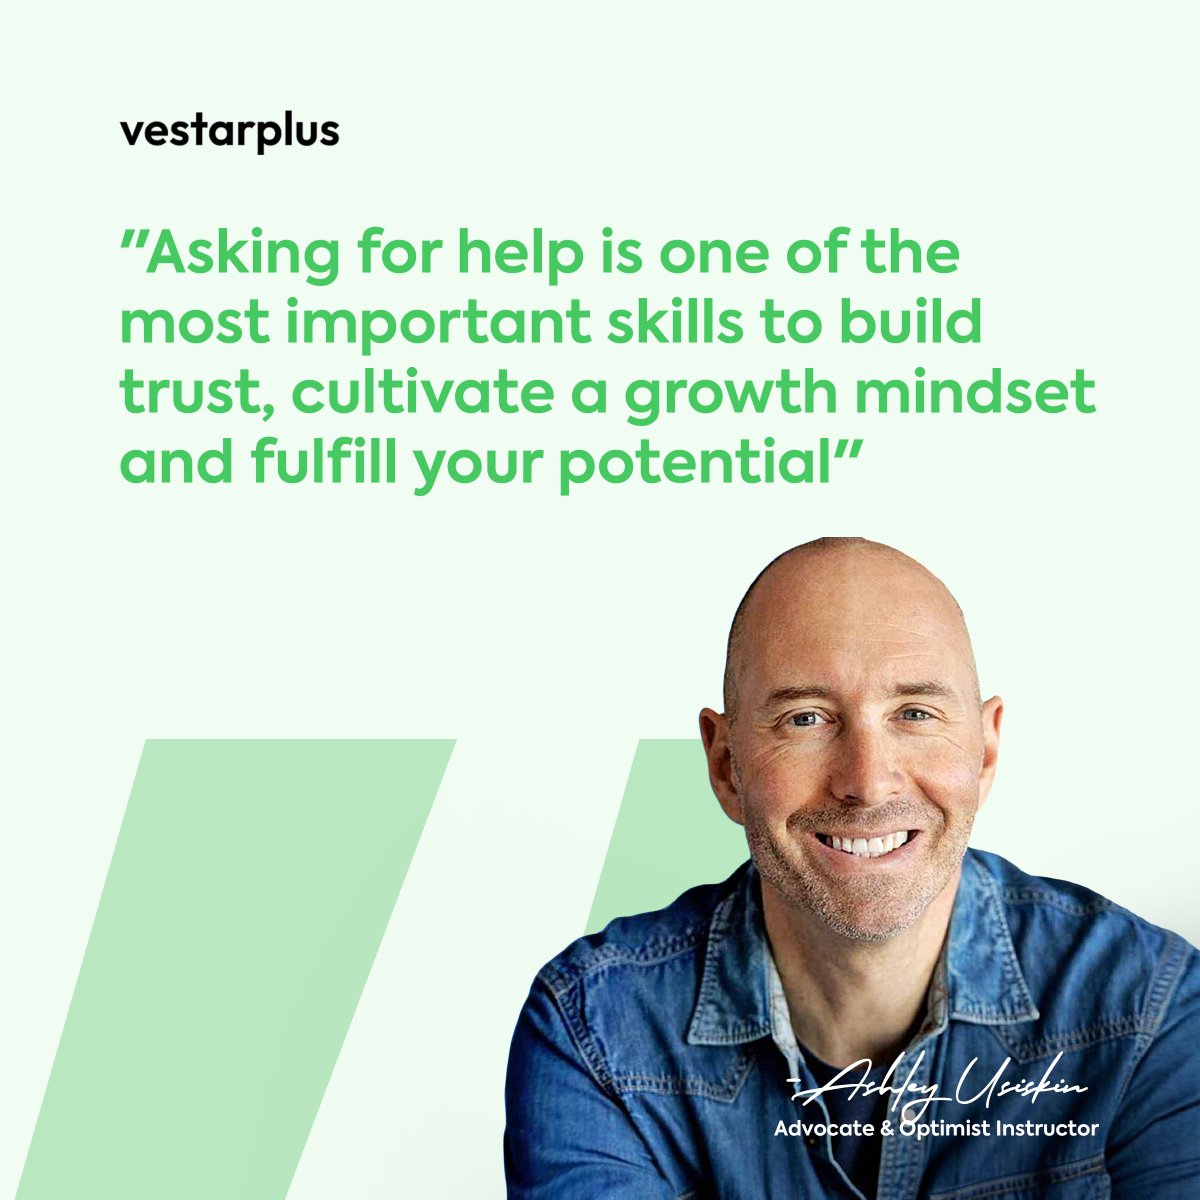 'Asking for help is one of the most important skills to build trust, cultivate a growth mindset and fulfill your potential'... Ashley Usiskin. #quotes #office #growth #growthmindset #business #tech #startup #entreprenuer #sme